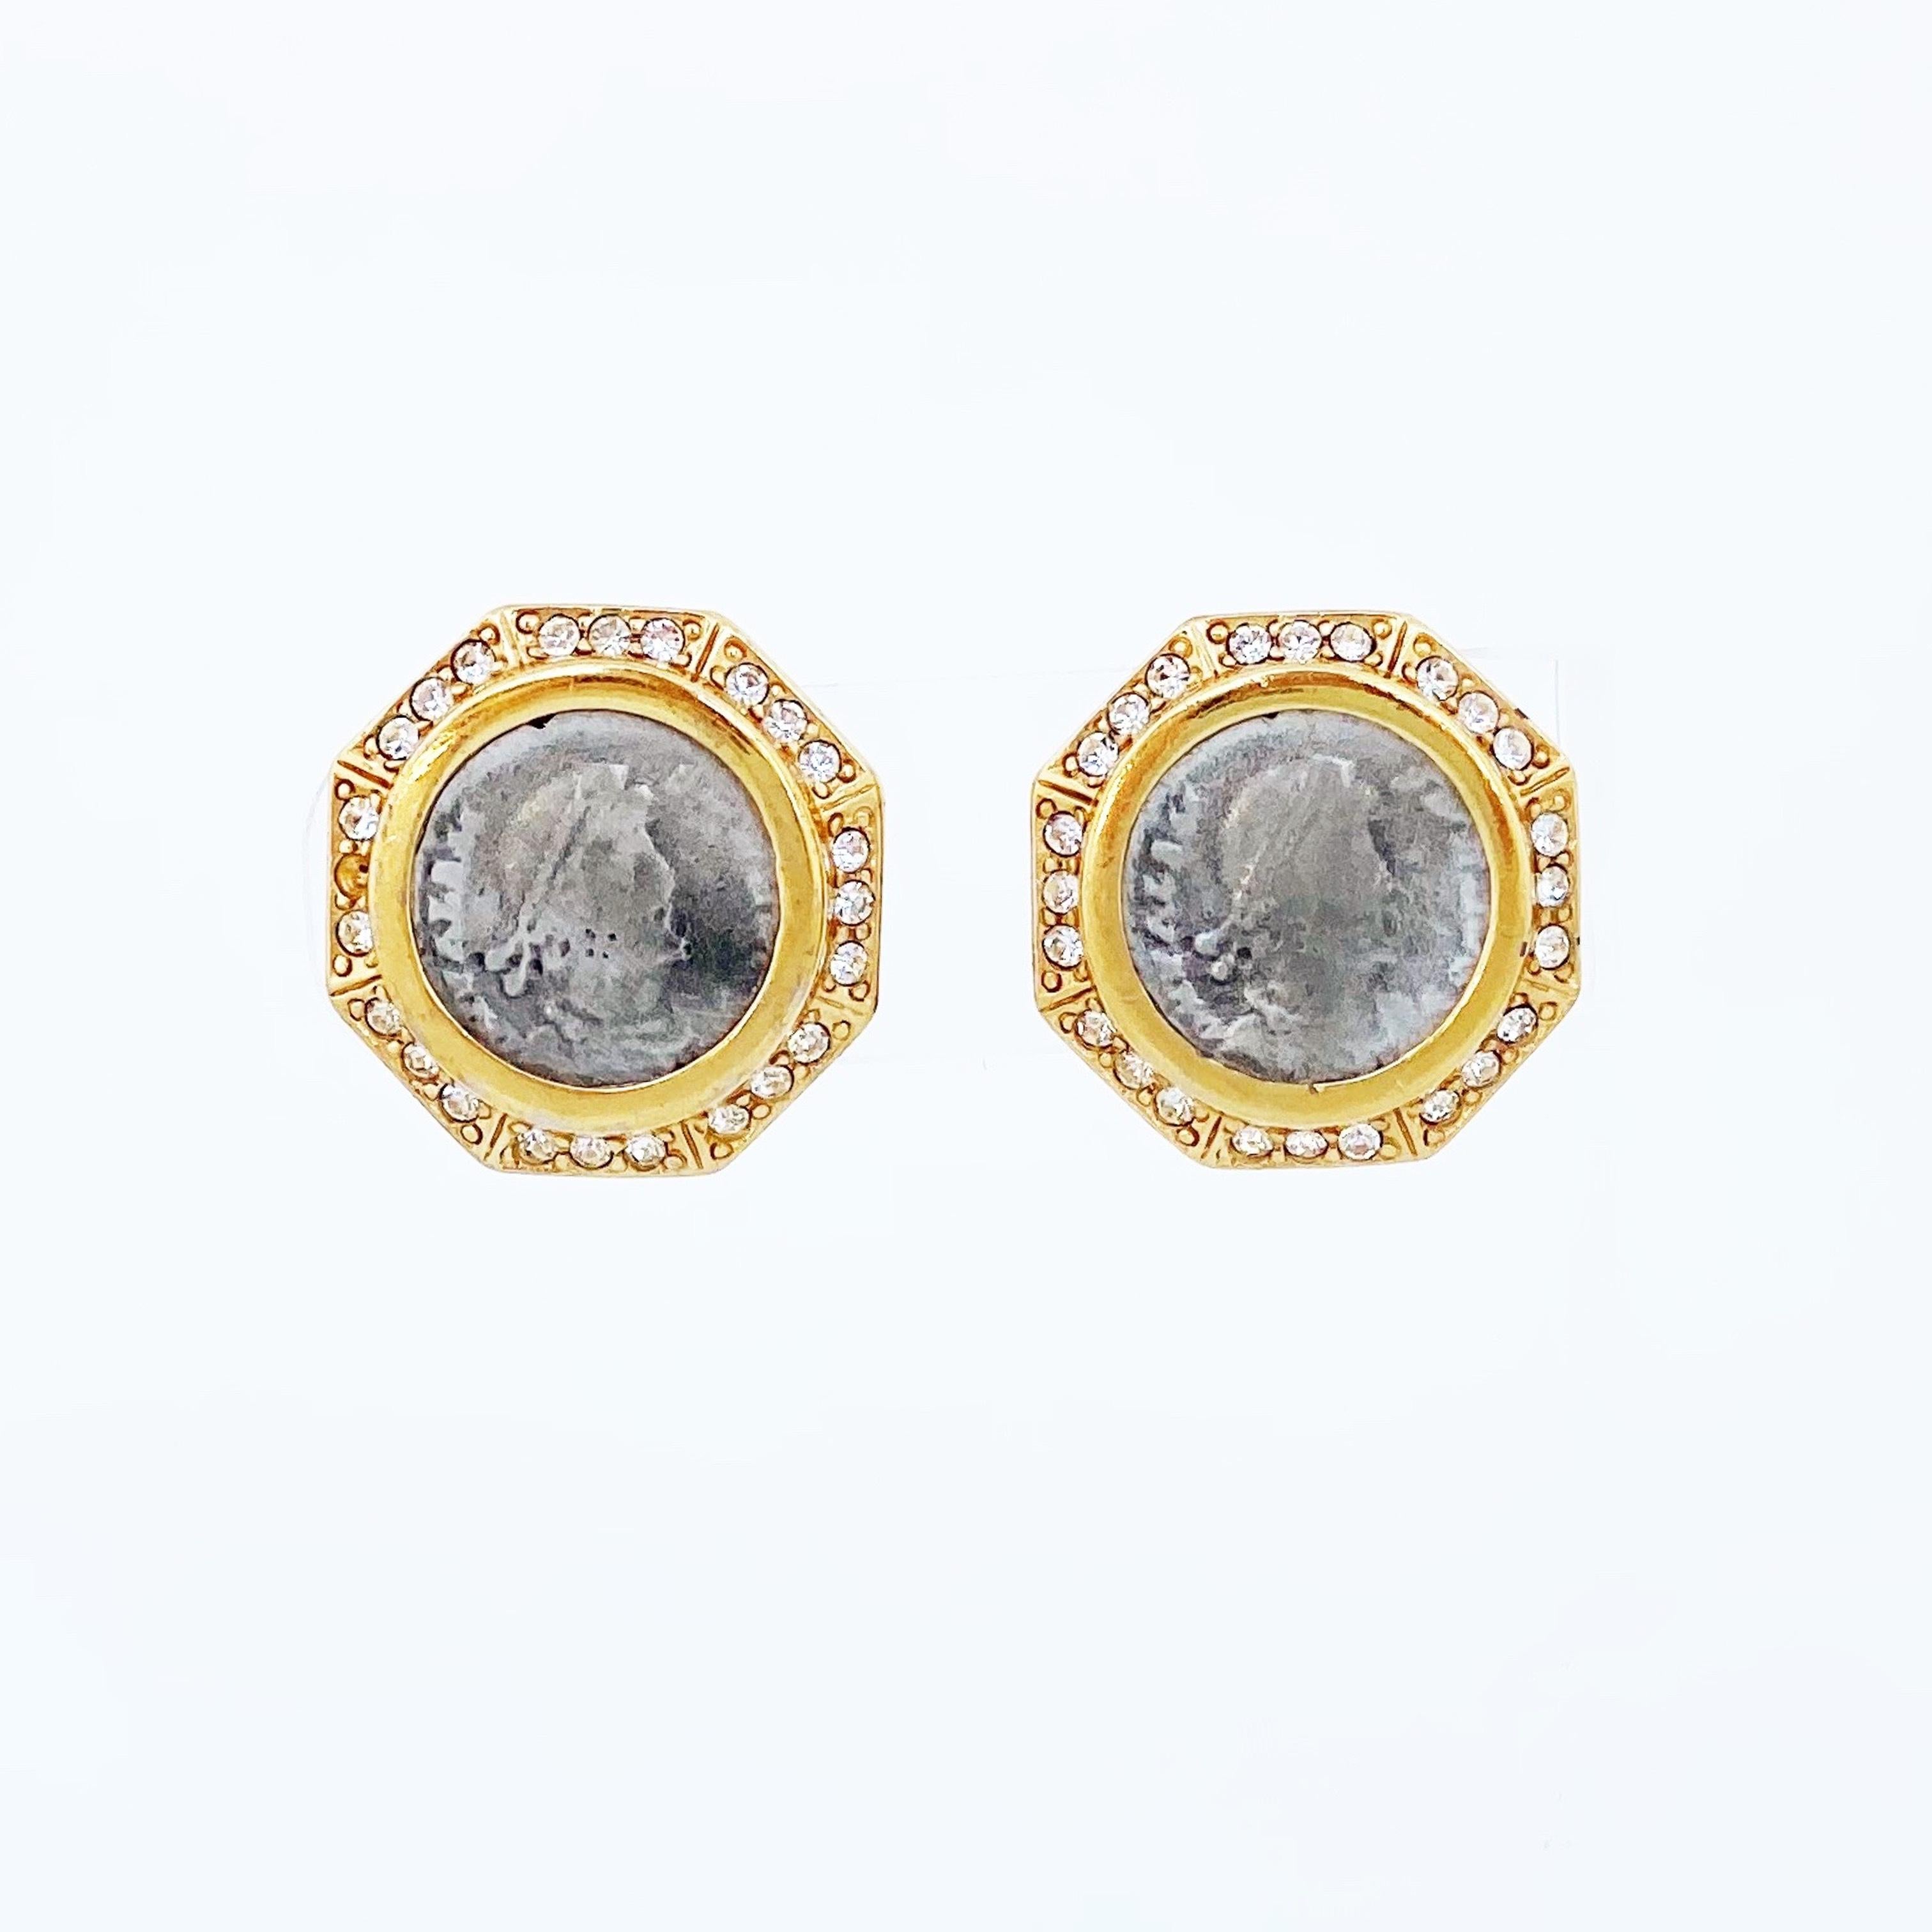 Modern Octagon Roman Coin Earrings With Crystal Accents By Ciner, 1980s For Sale